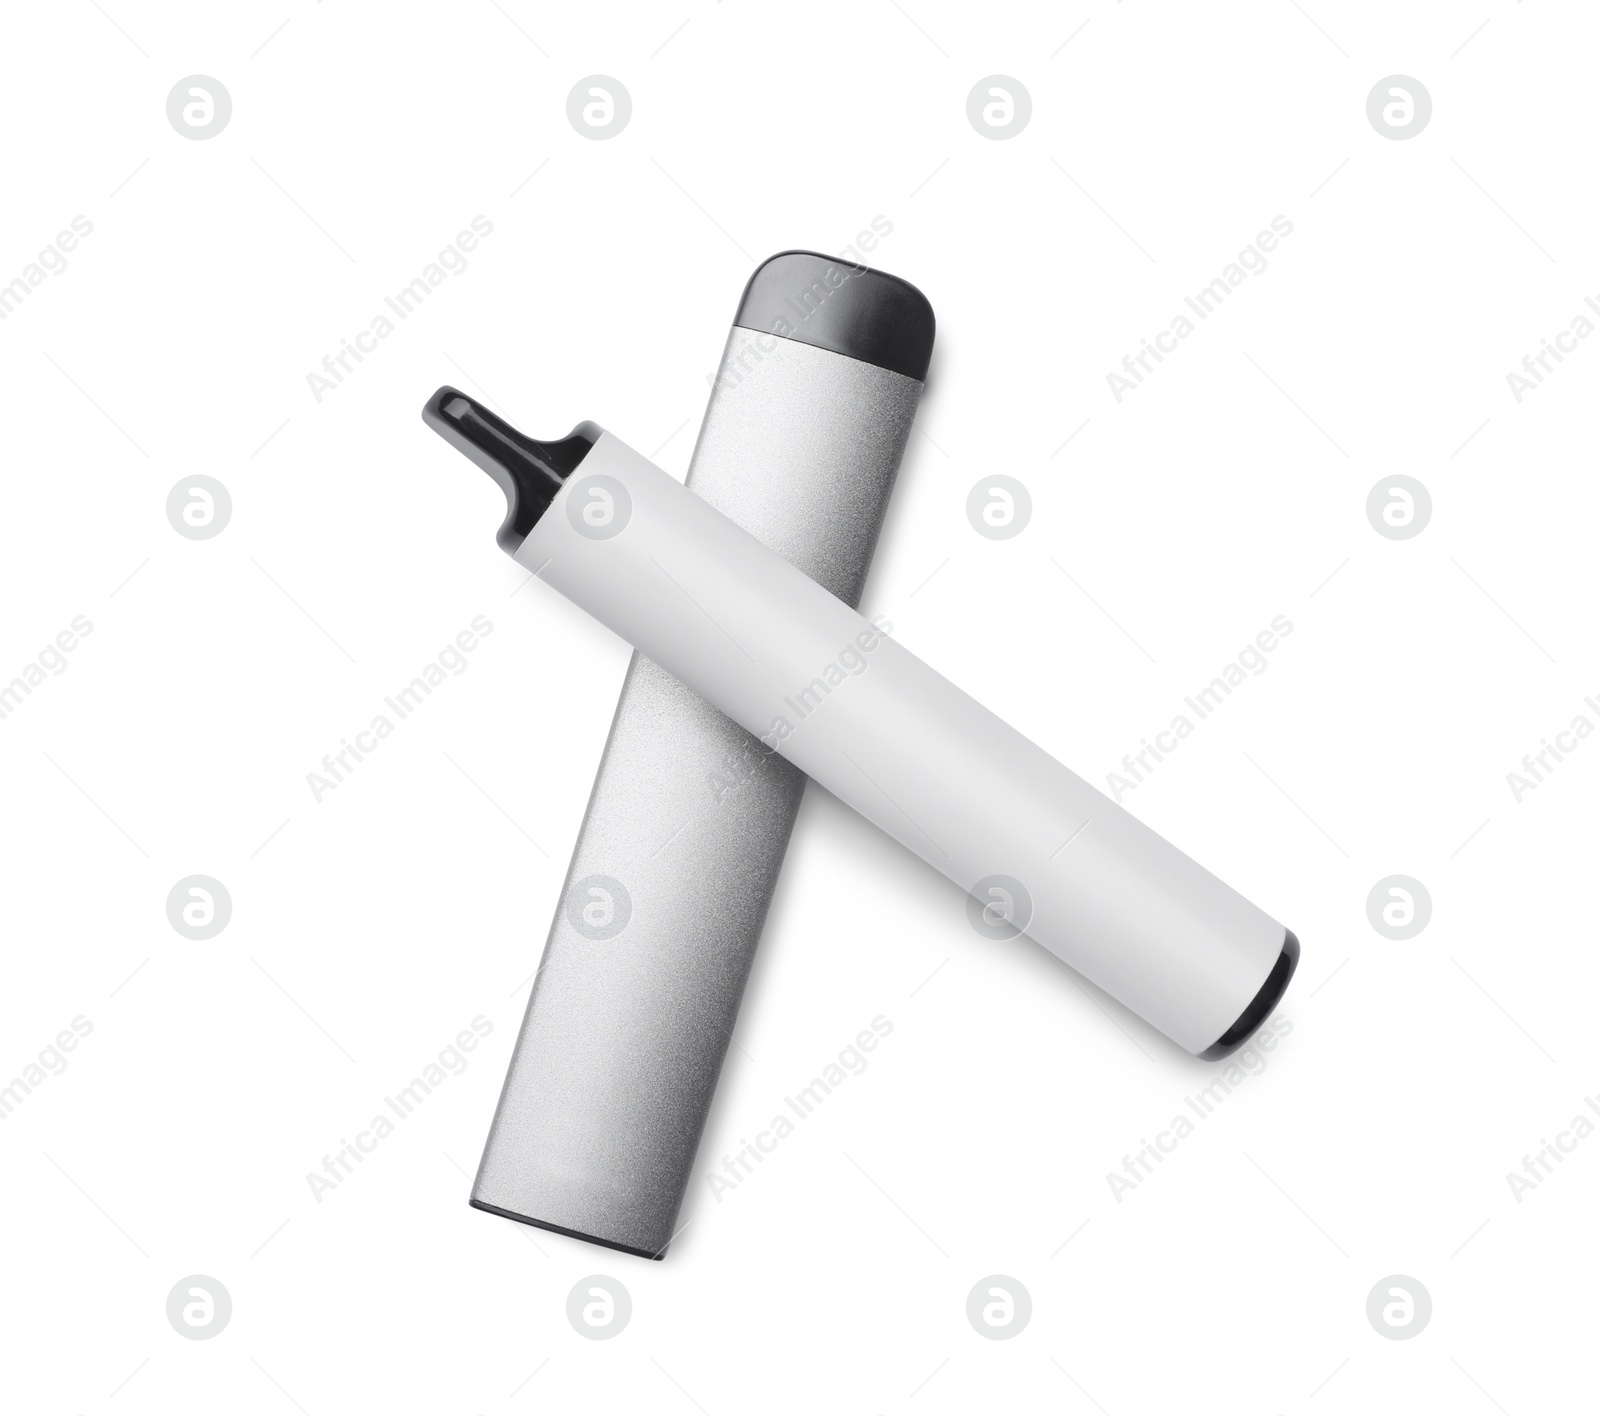 Photo of Two electronic cigarettes on white background, top view